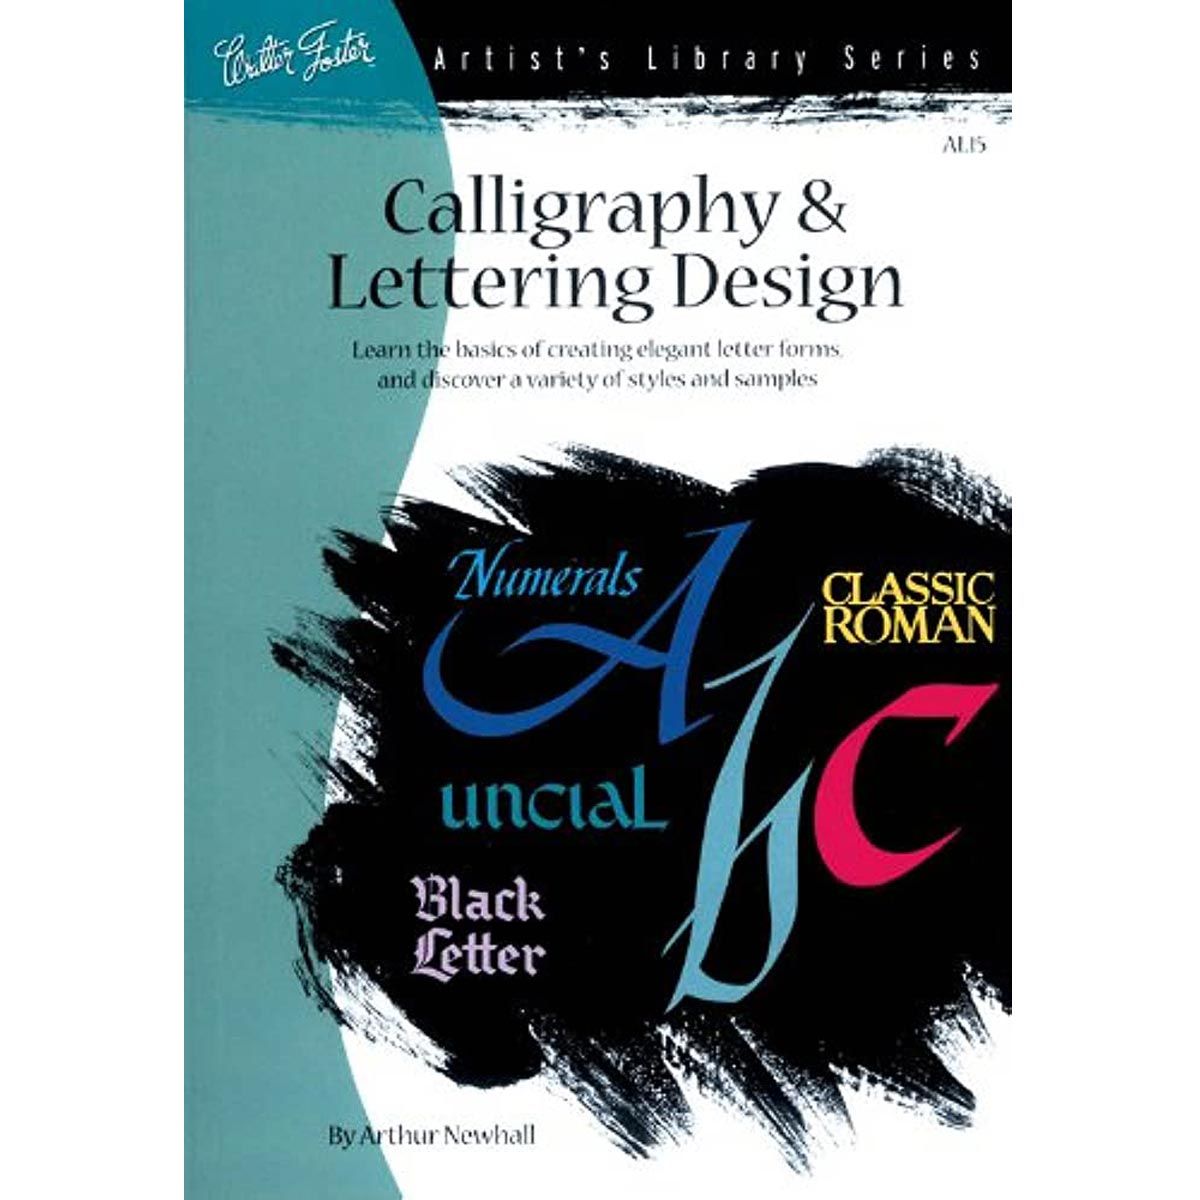 Calligraphy & Lettering Design Book